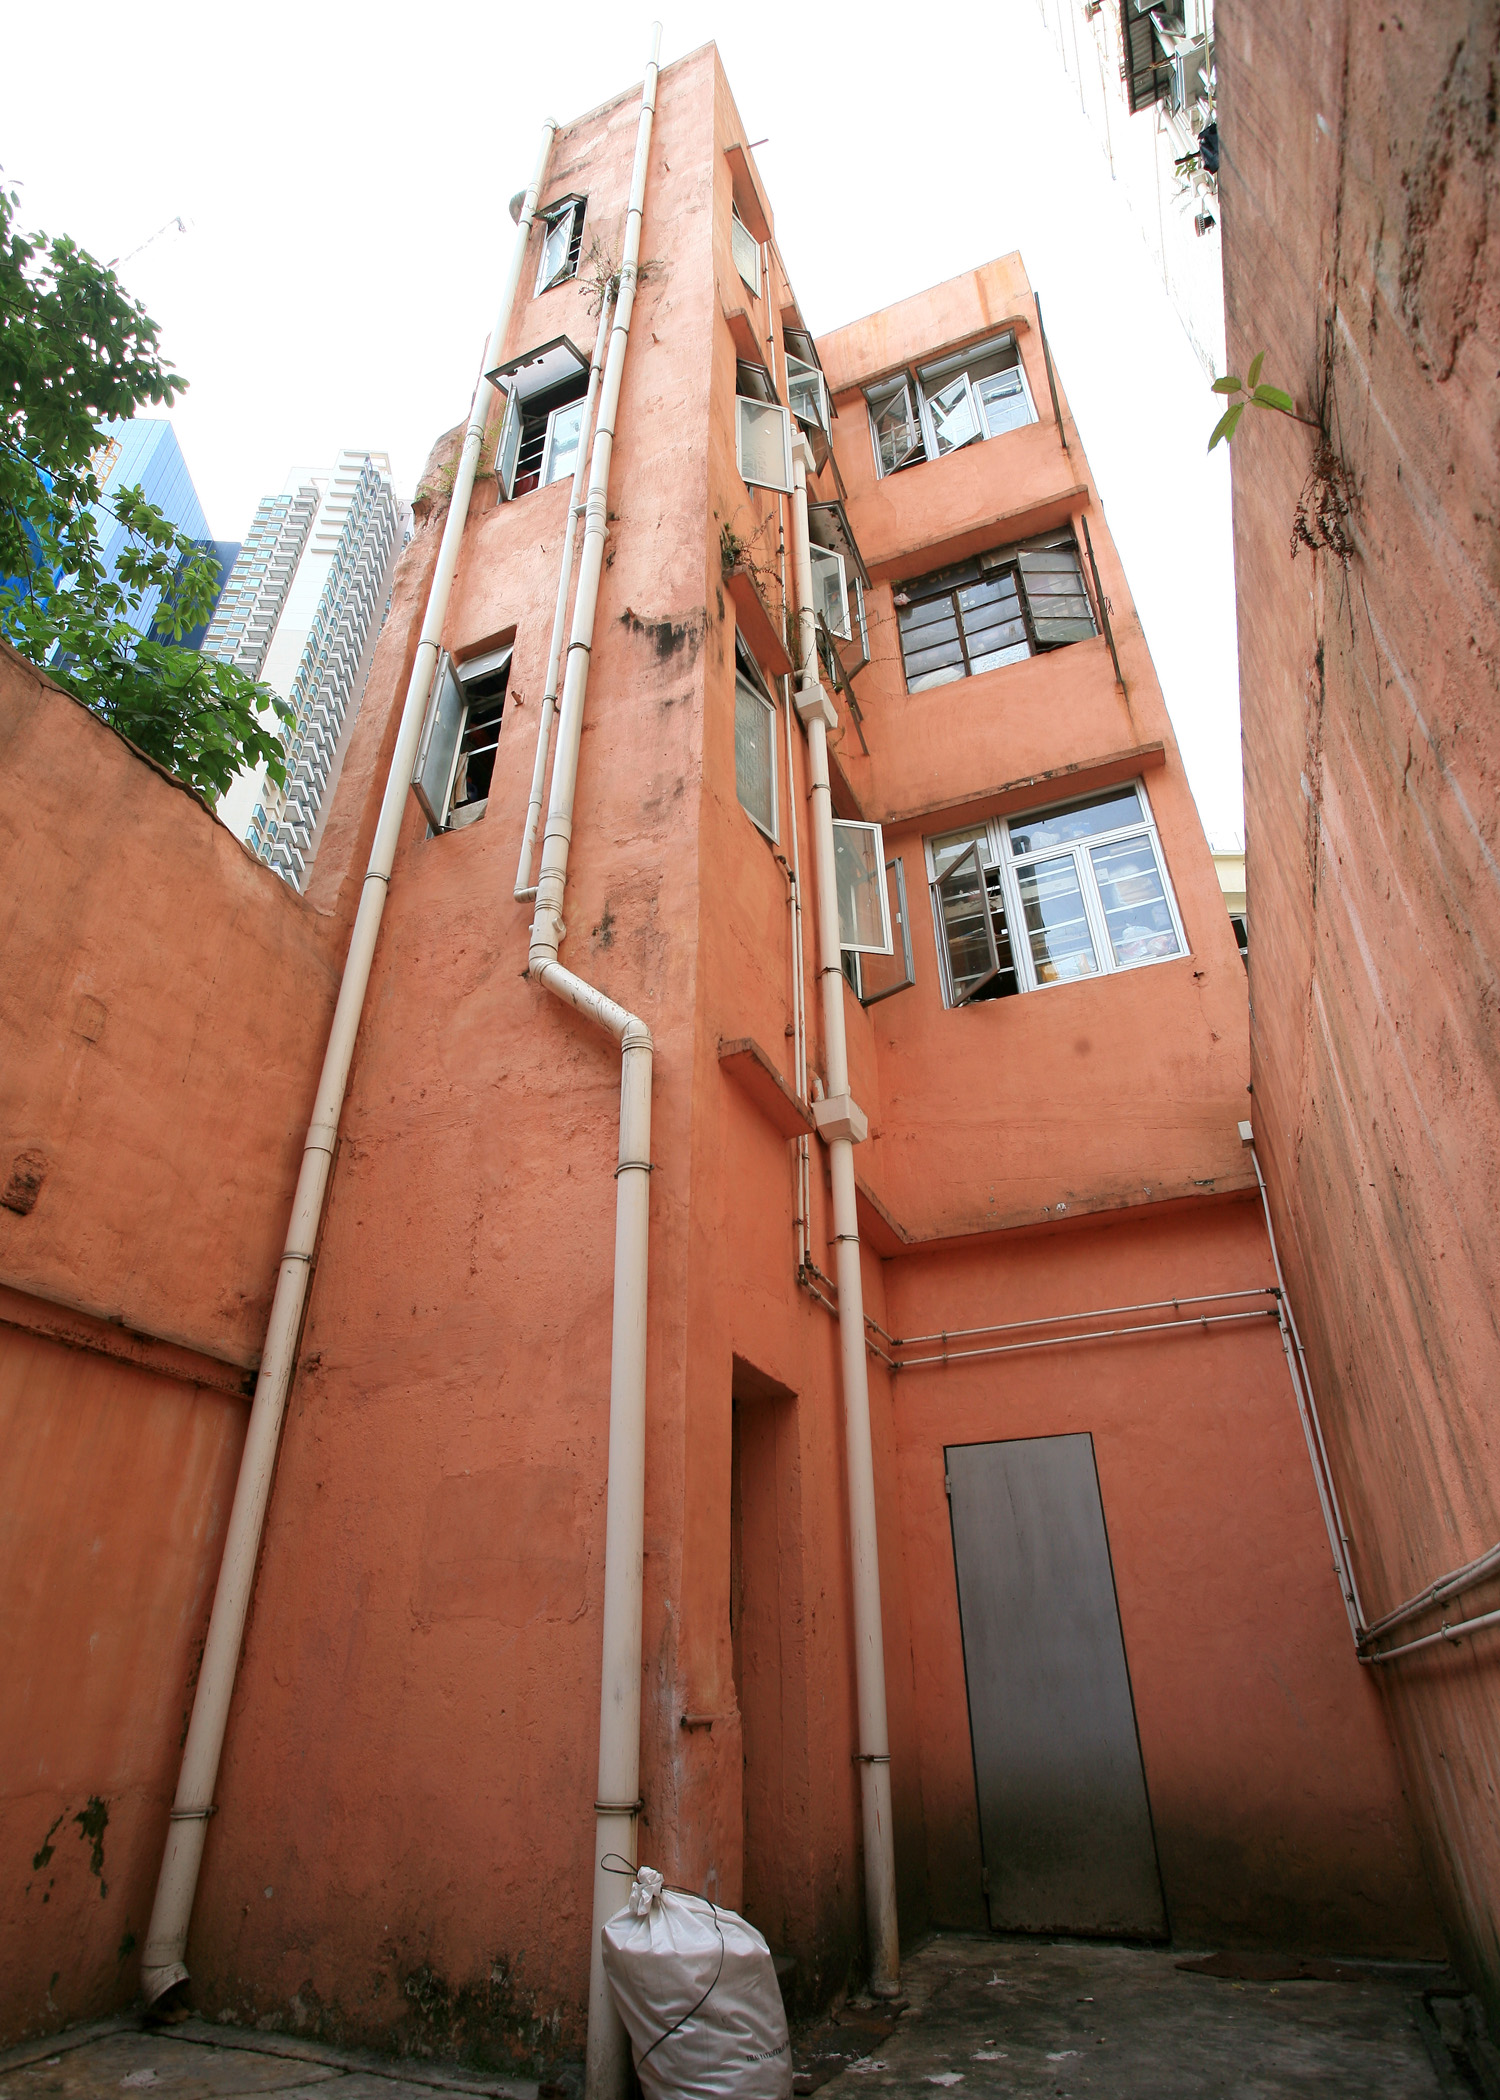 Conserve and Revitalise Hong Kong Heritage - The Blue House